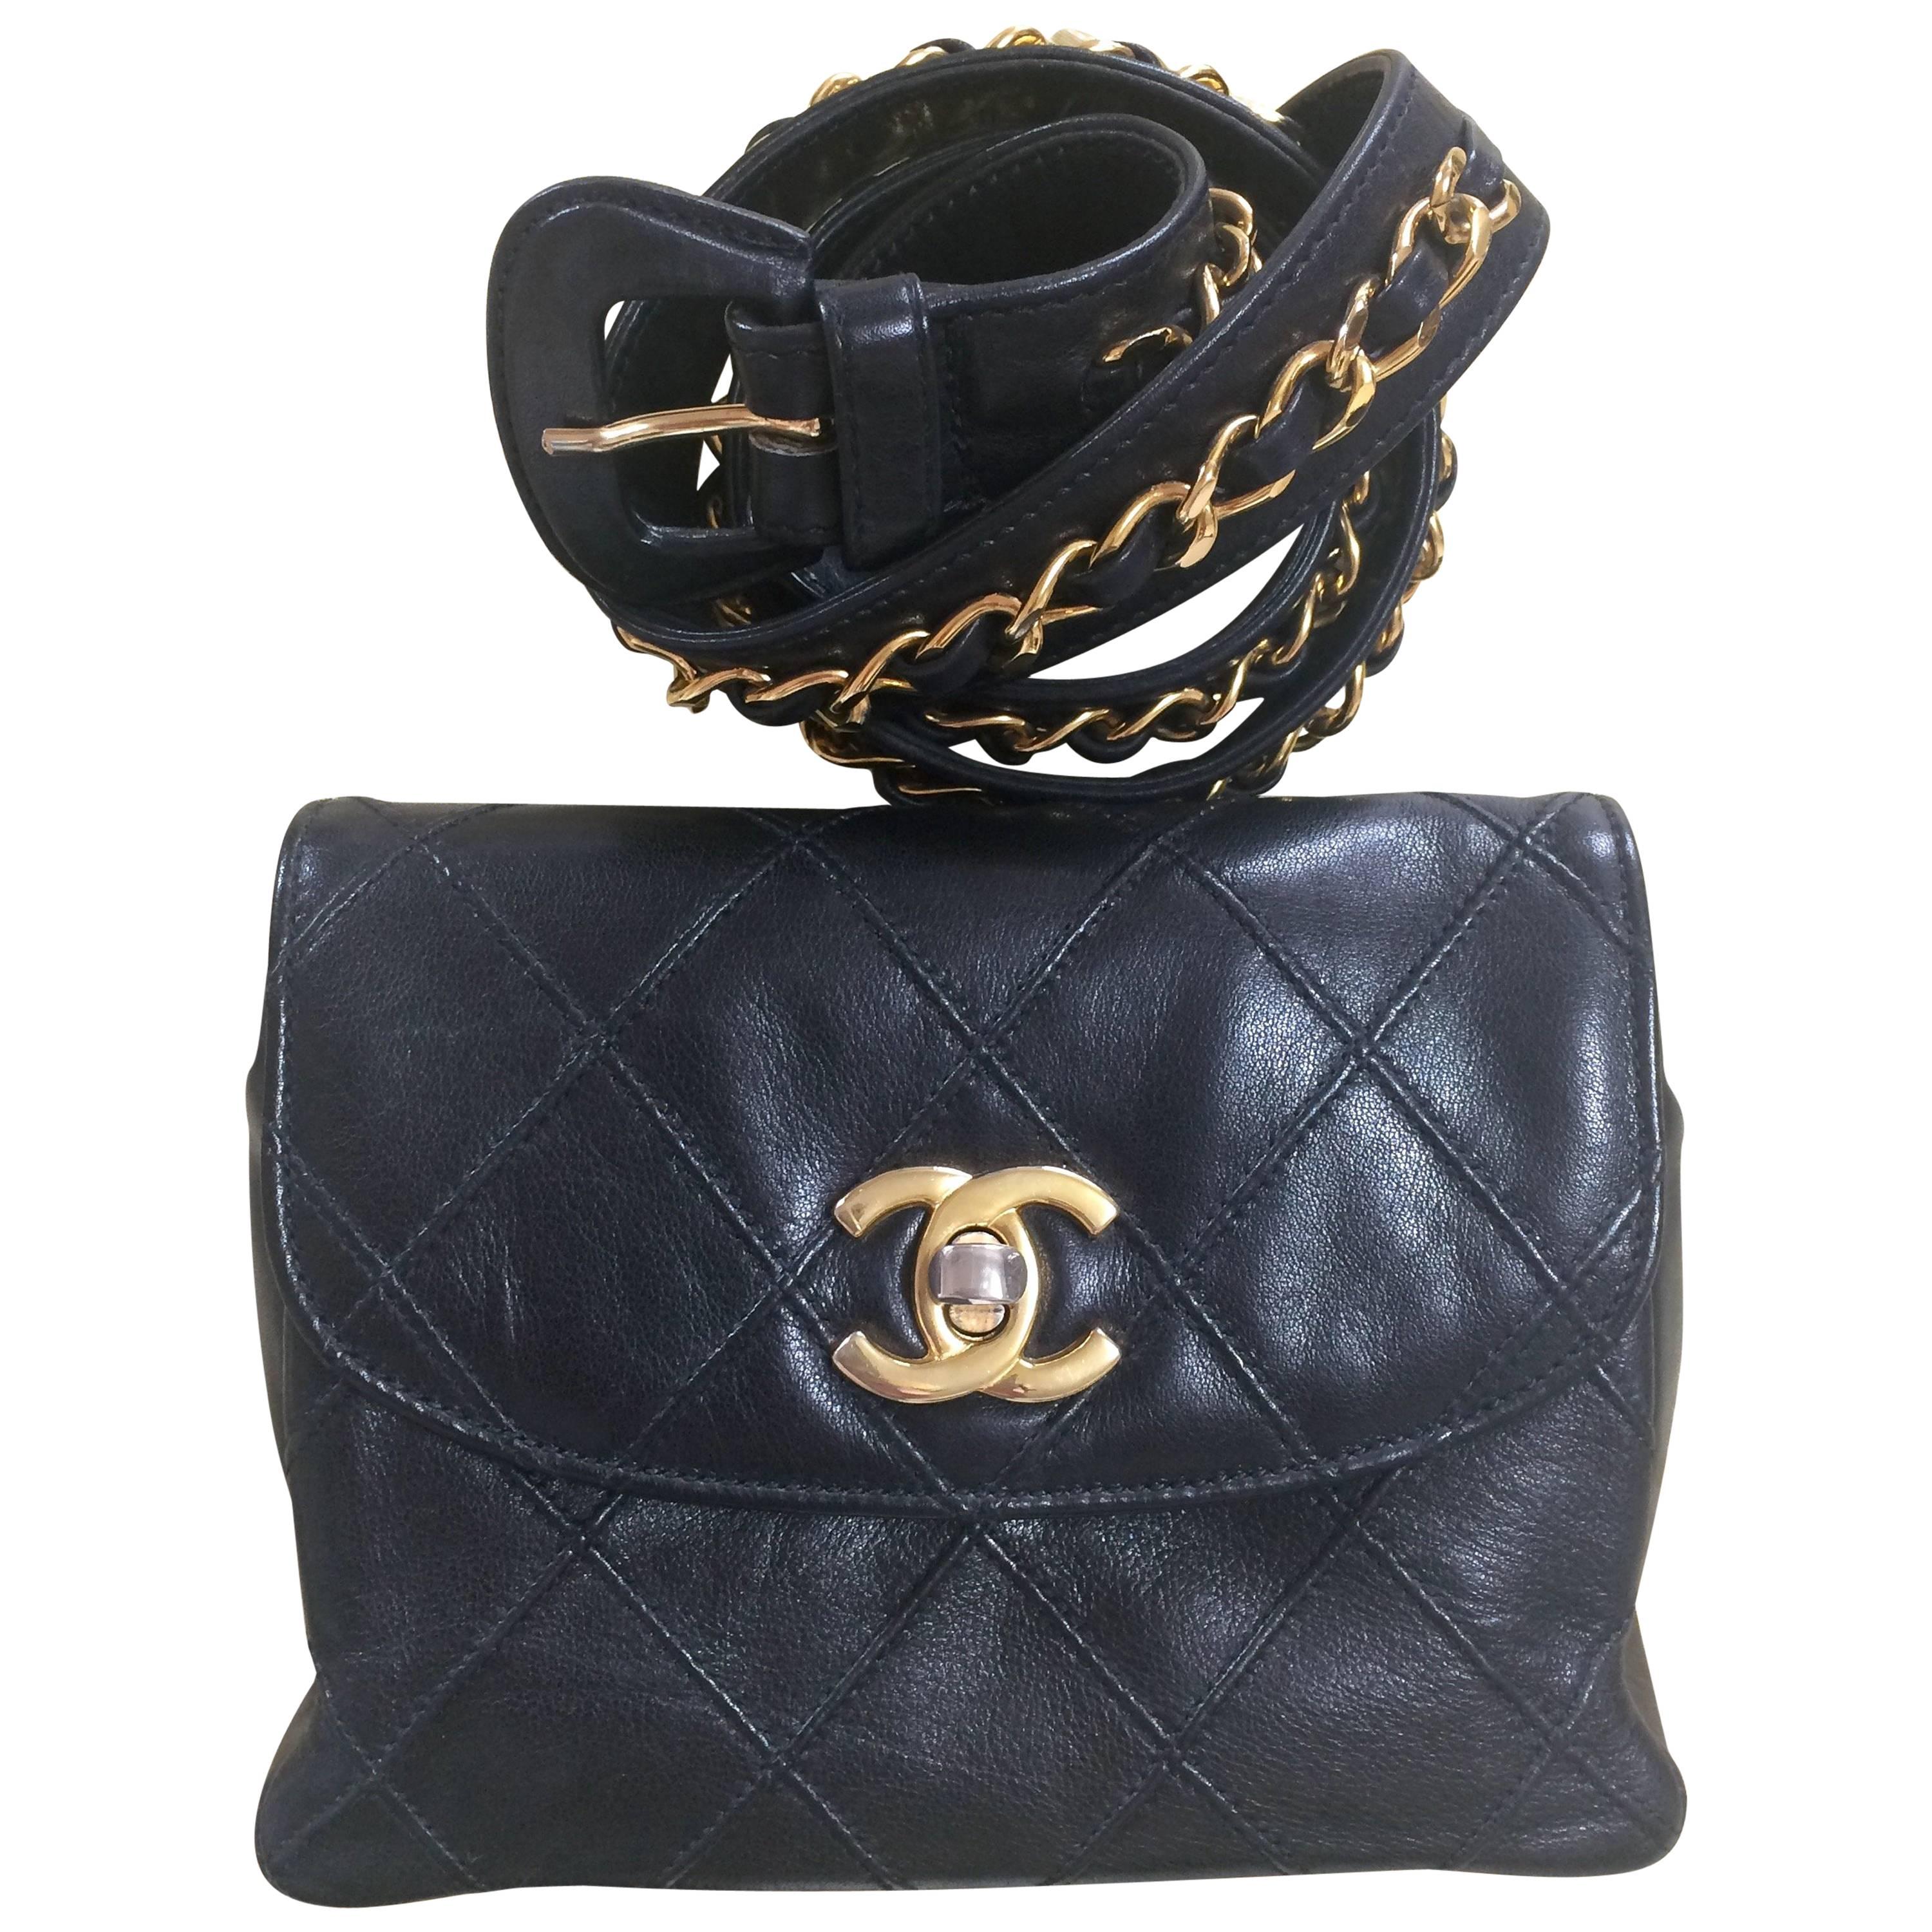 Vintage CHANEL black waist purse, fanny bag with golden chain belt and CC mark.